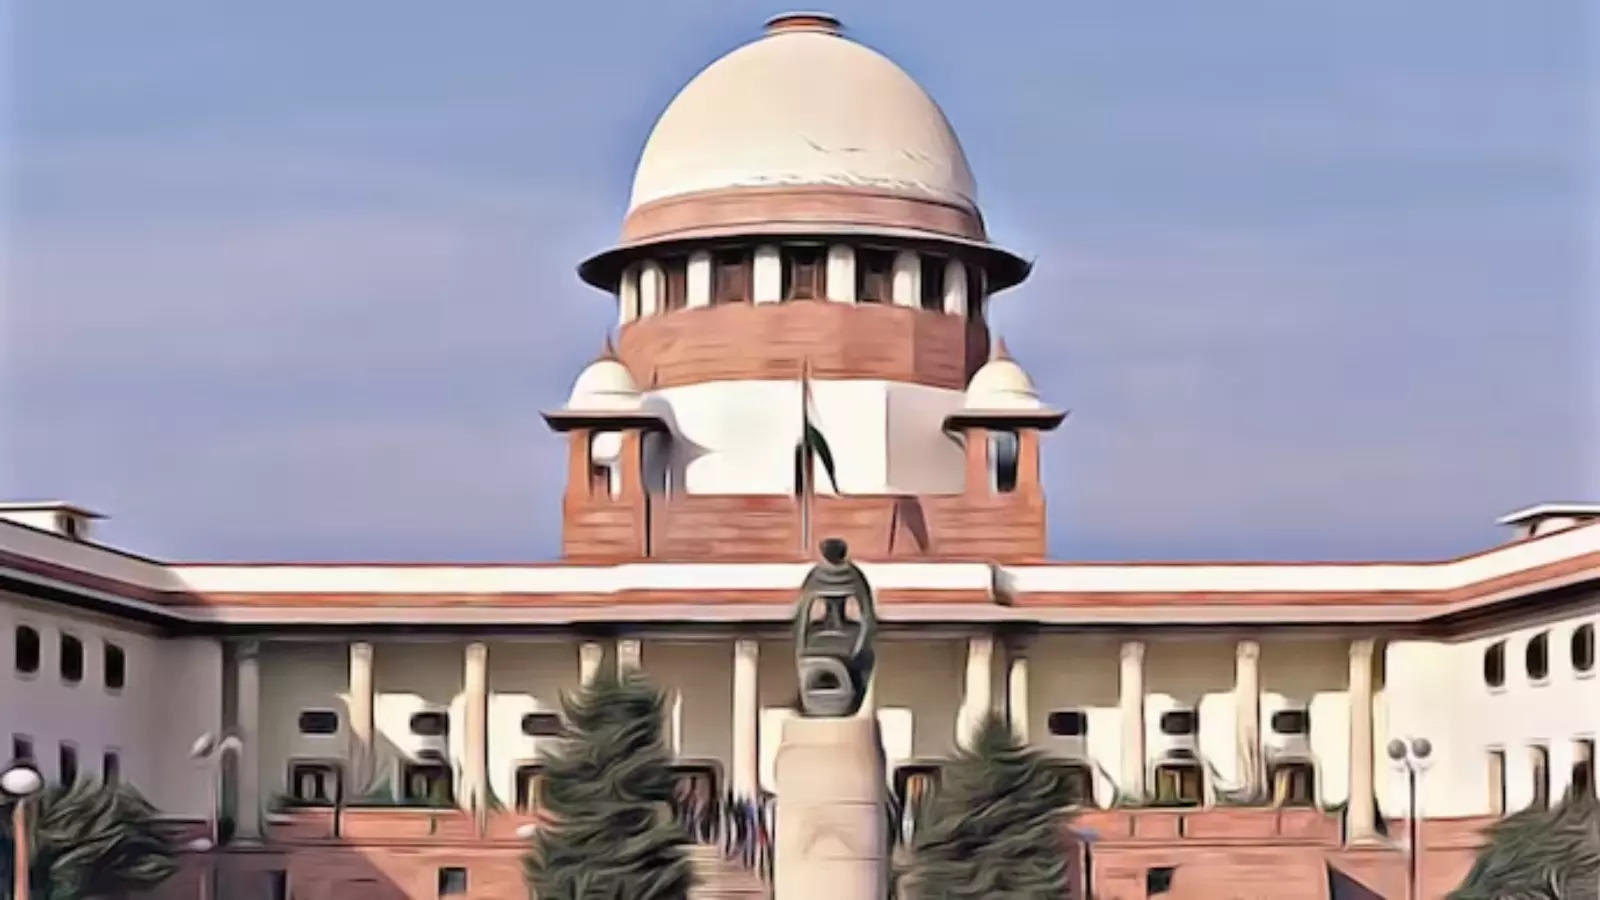 Reasons for SC collegium rejecting candidates for judgeship can't be made public: HC 